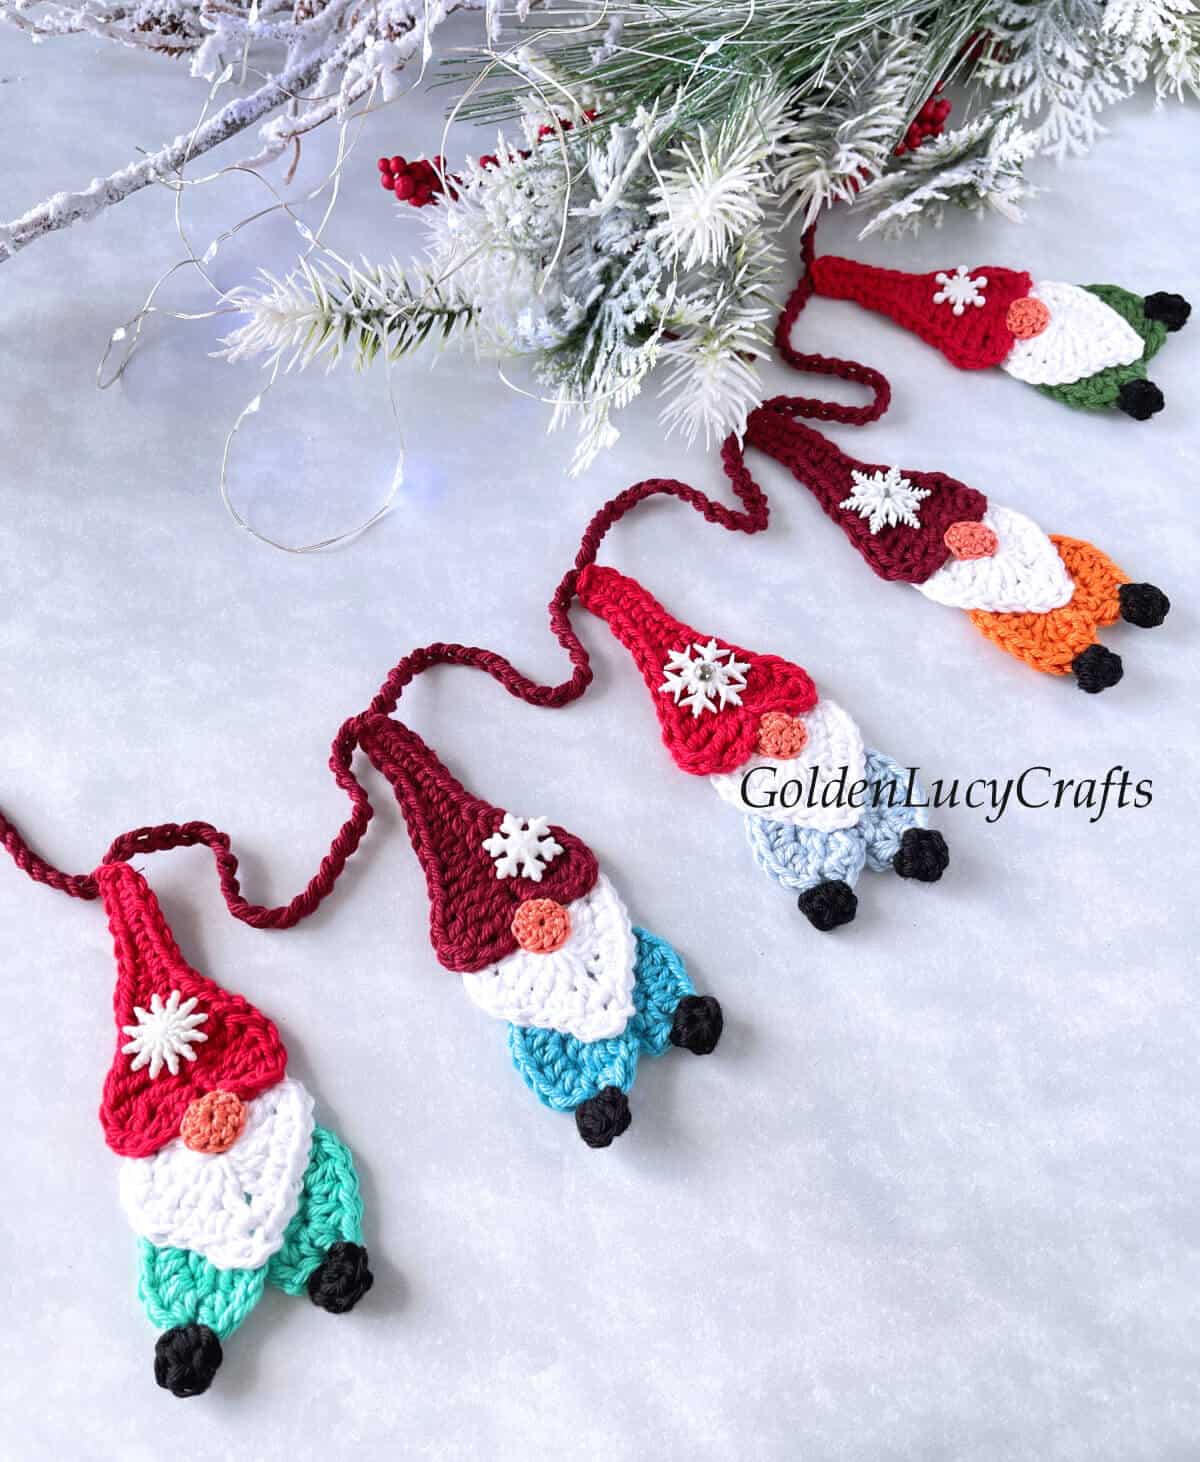 Part of crocheted gnome garland, close up picture.